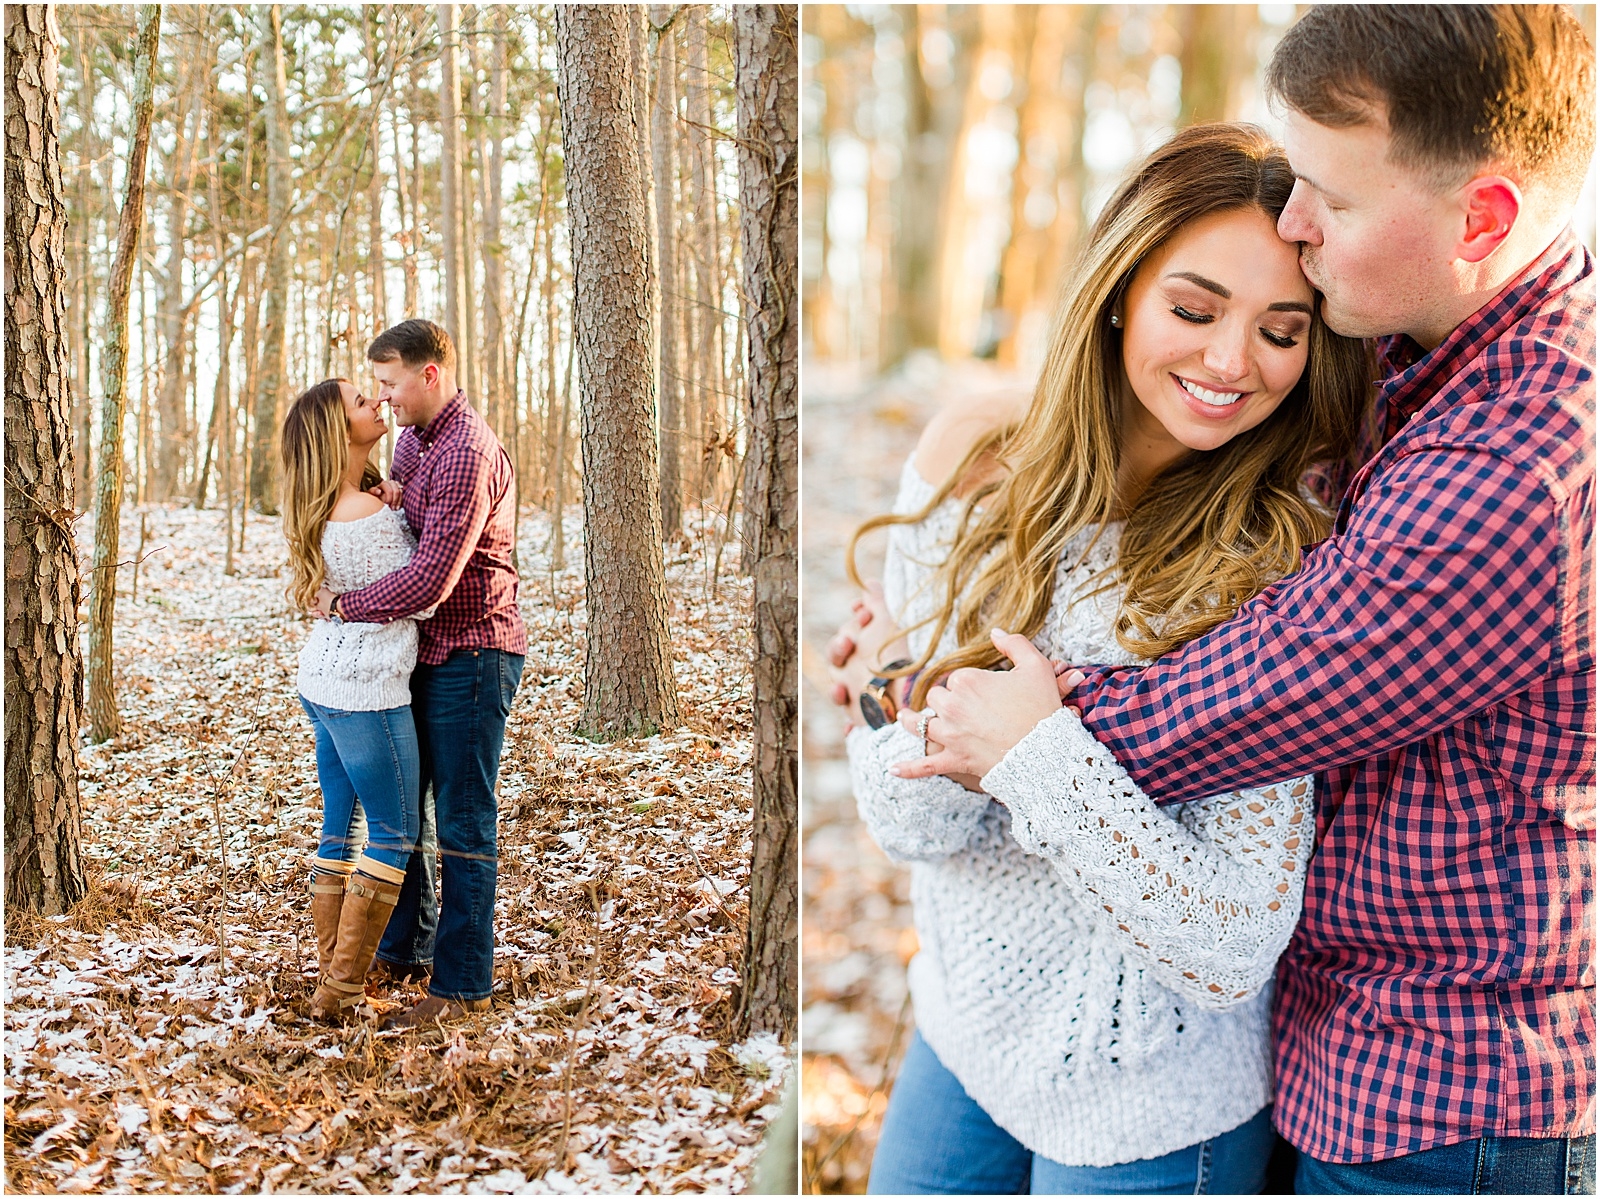 A Sunny Garden of the Gods Engagement Session | Shiloh and Lee | Bret and Brandie Photography034.jpg